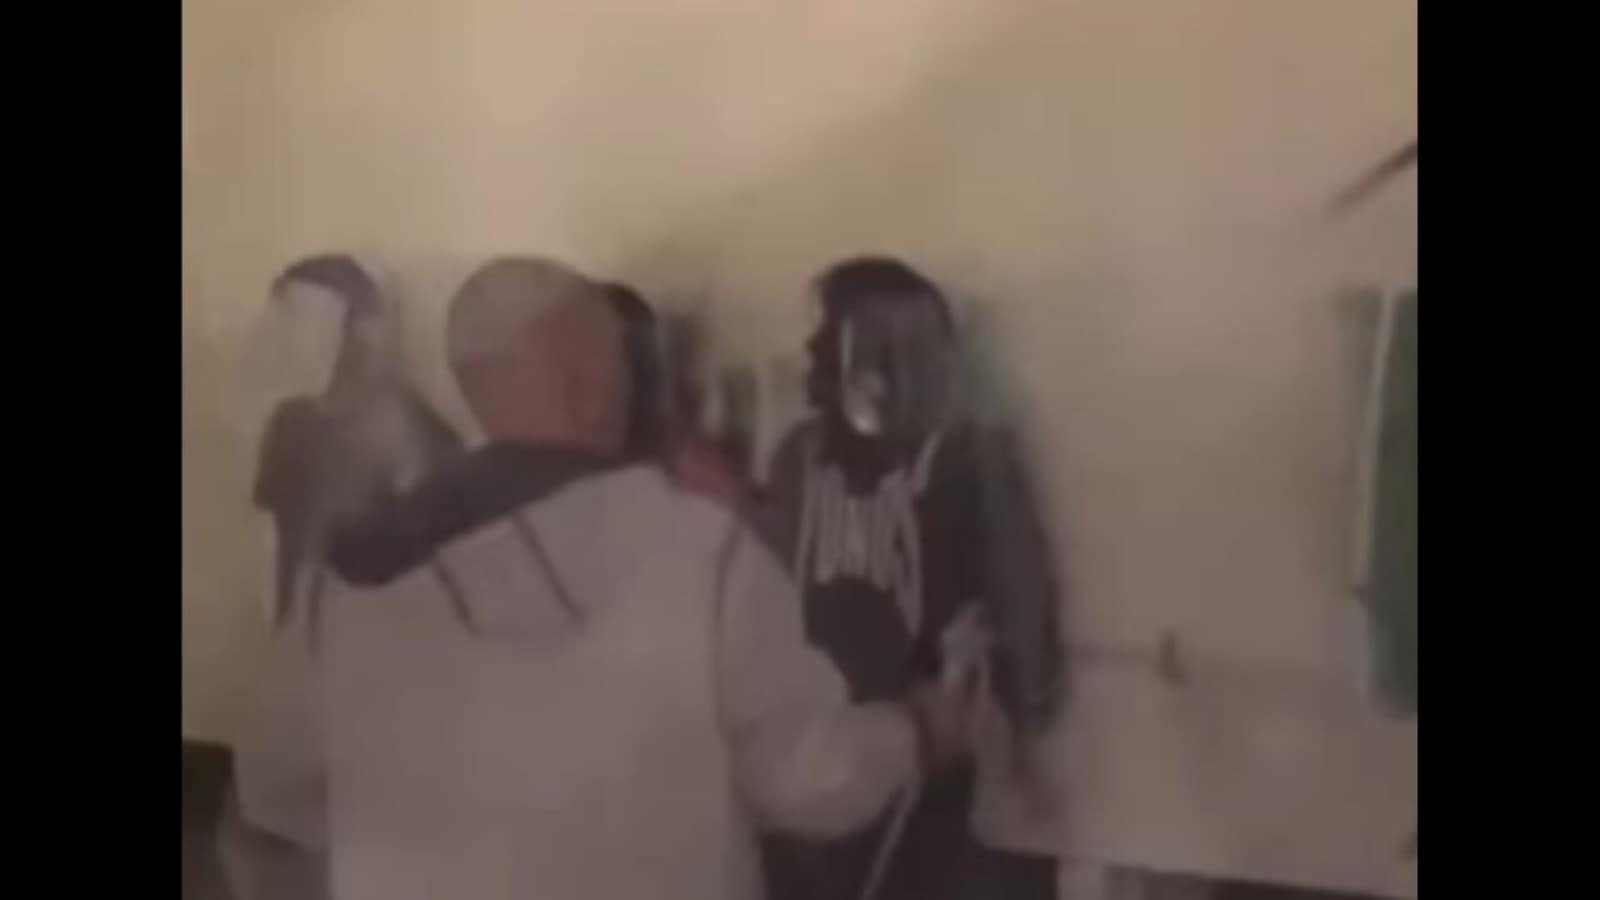 Contractor sprays paint over anti-Israel protesters blocking ‘antisemitic’ graffiti at Ohio university. Watch